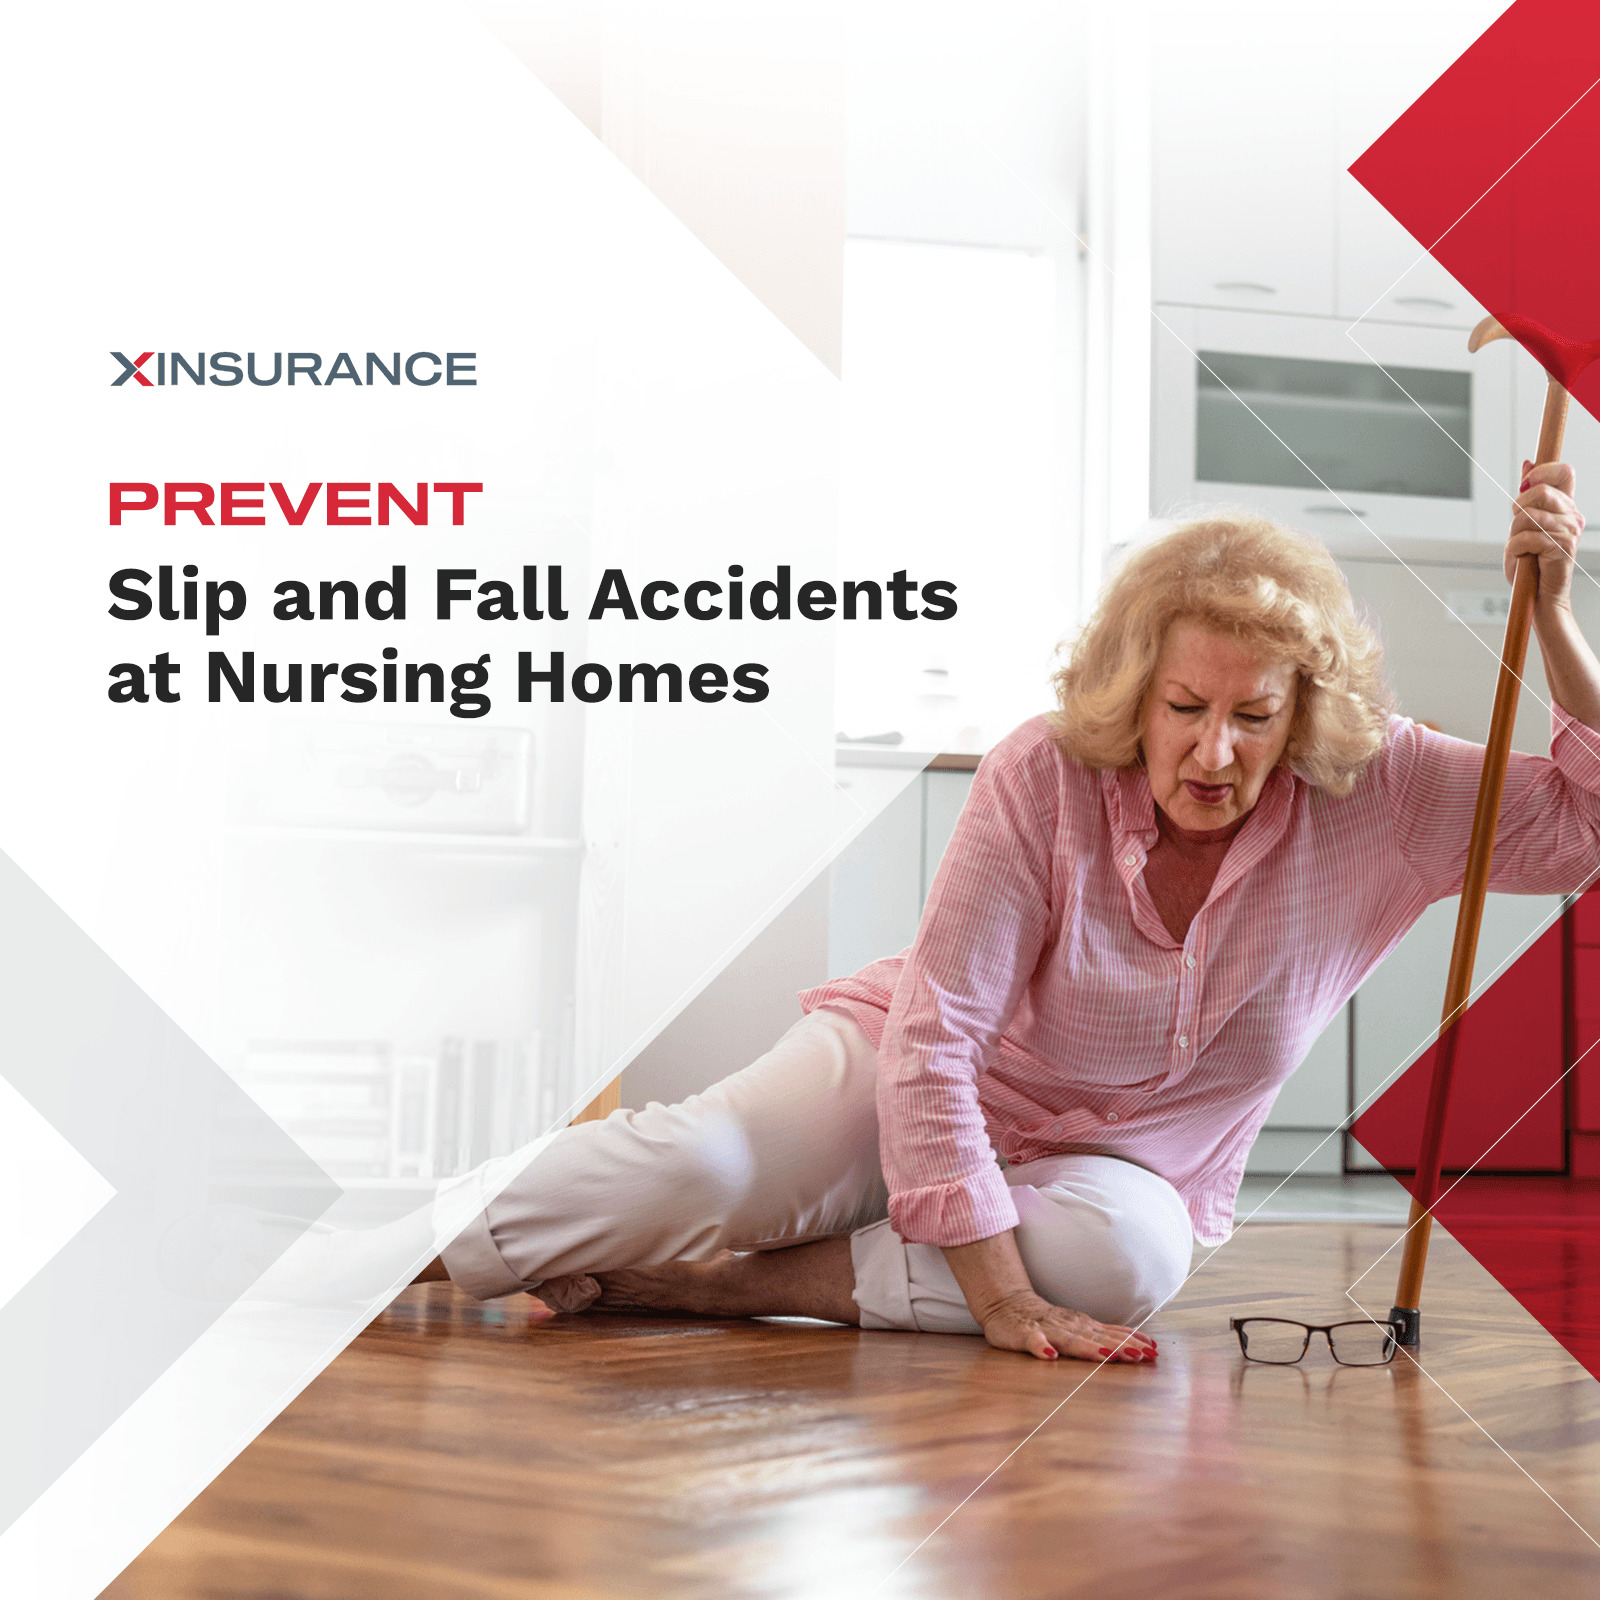 Woman Fell - Prevent Slip and Fall Accidents at Nursing Homes | Nursing home insurance